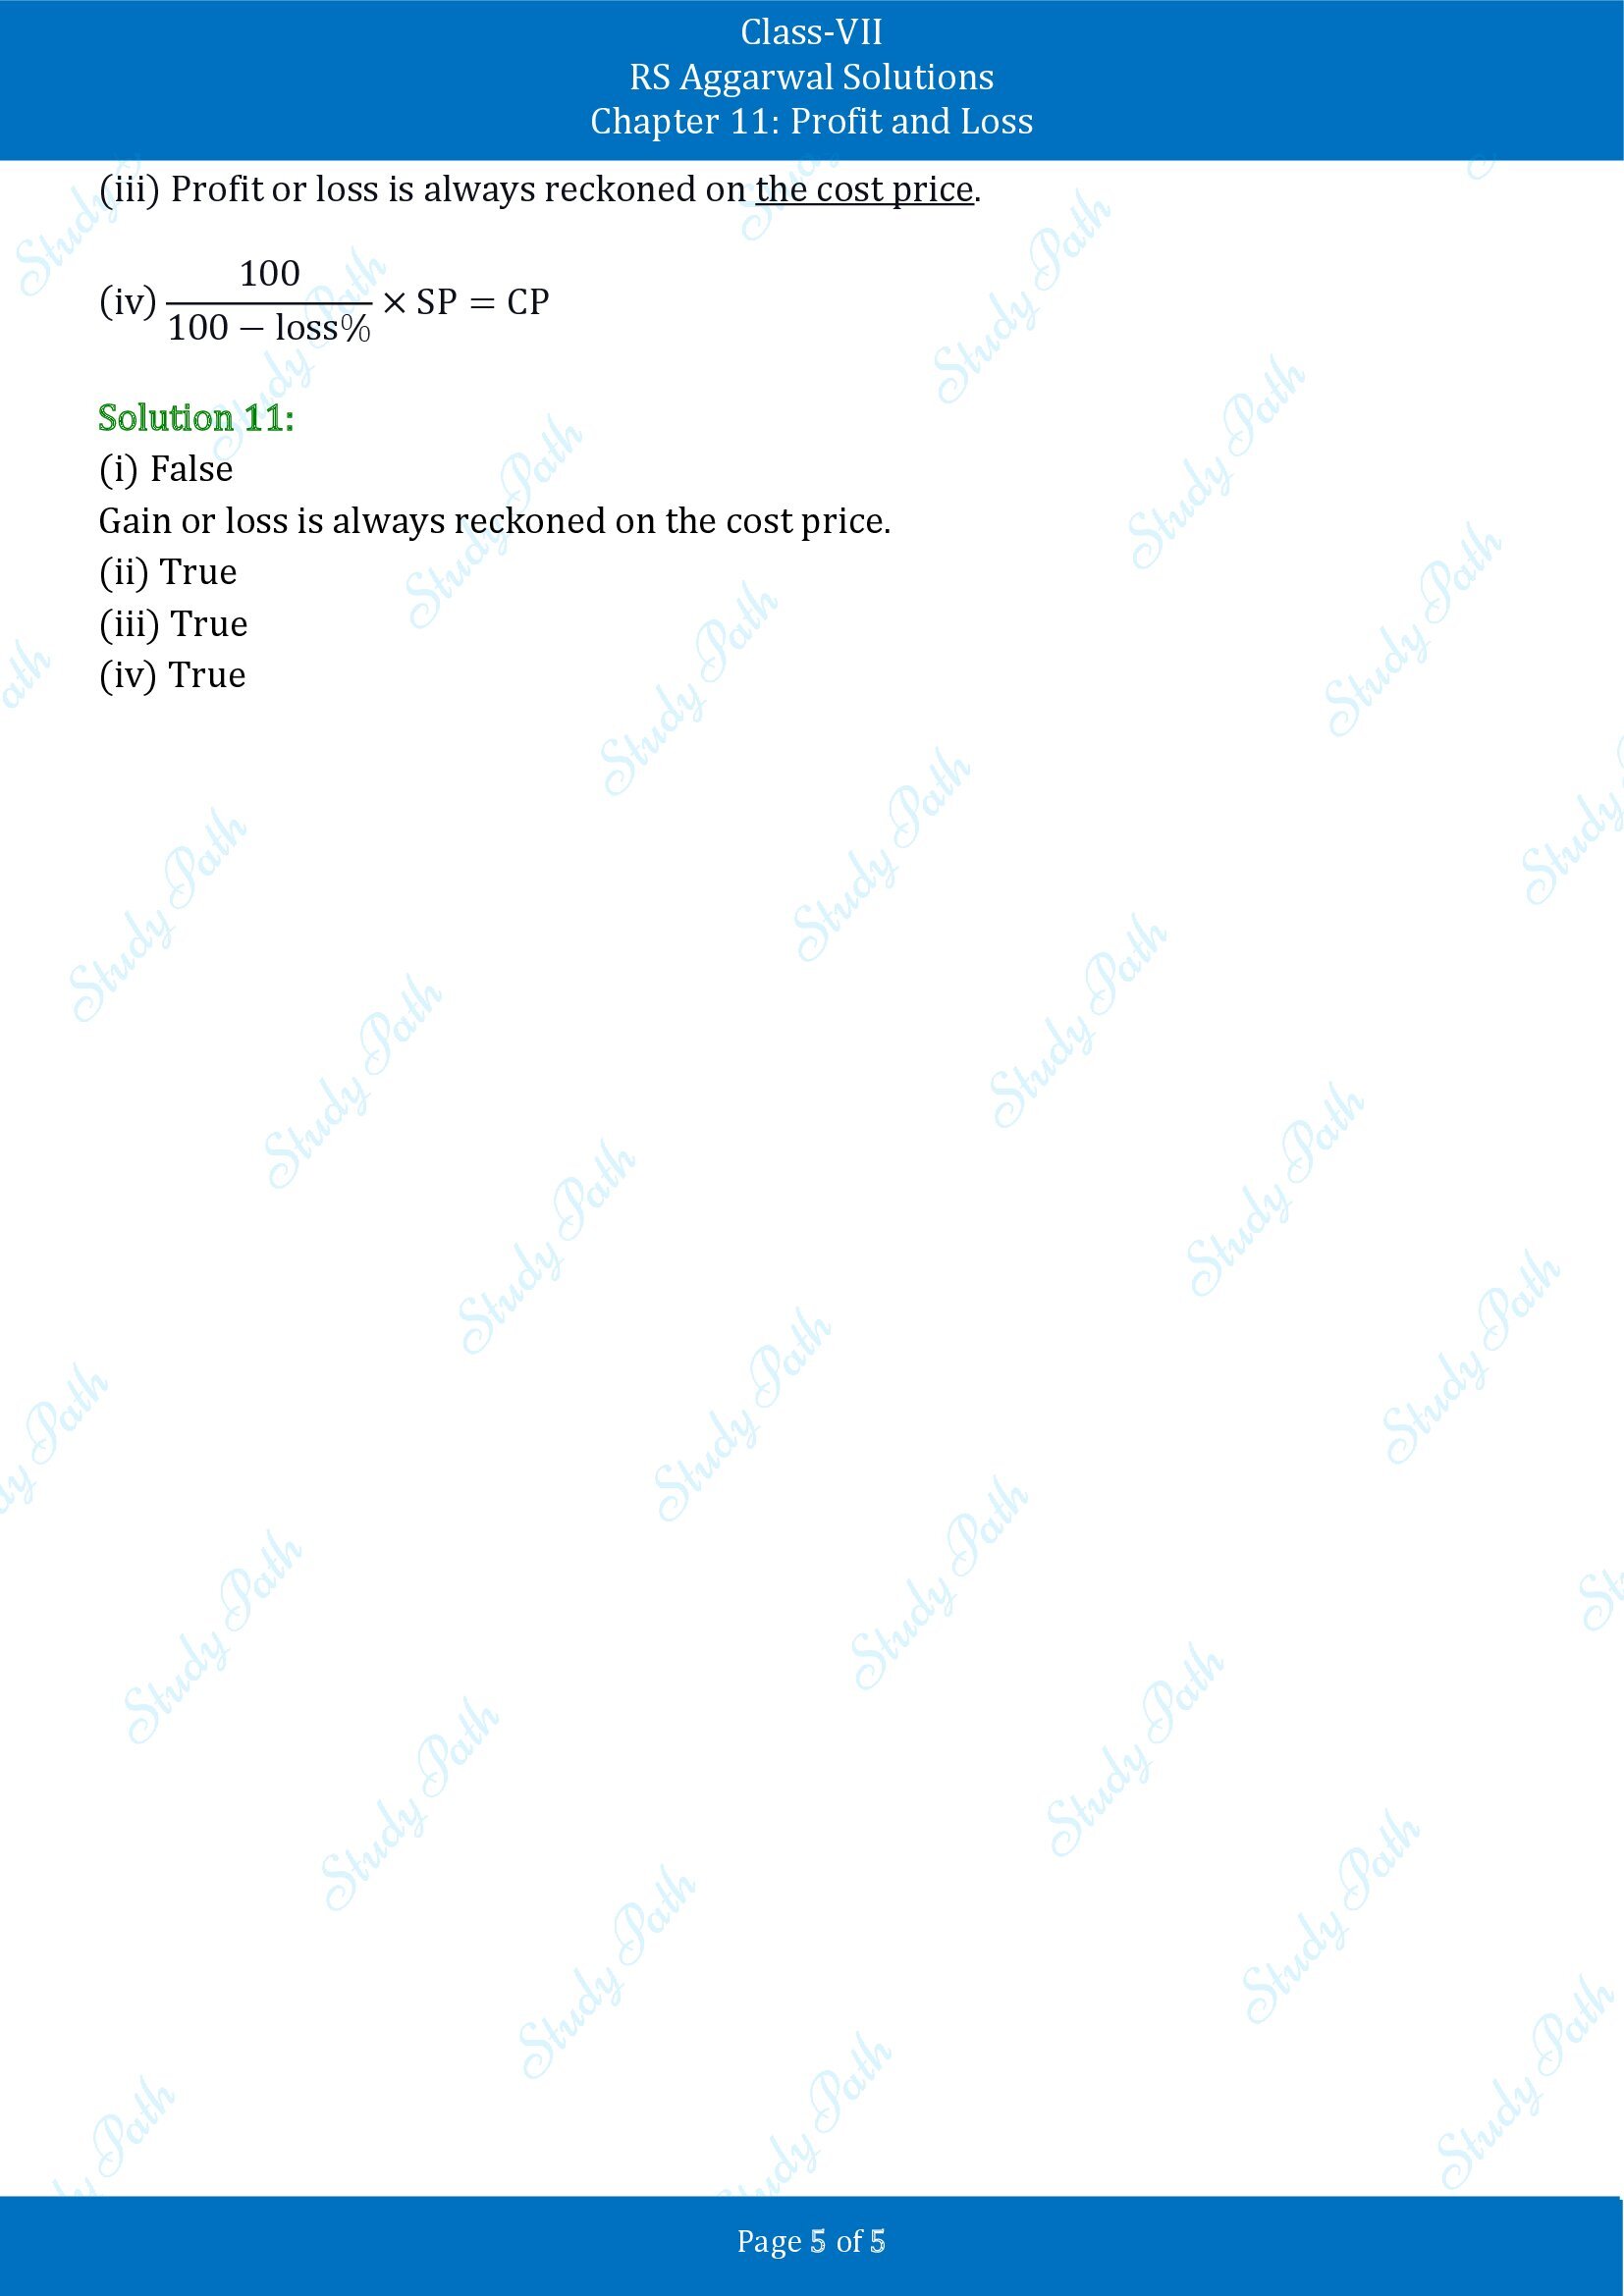 RS Aggarwal Solutions Class 7 Chapter 11 Profit and Loss Test Paper 00005